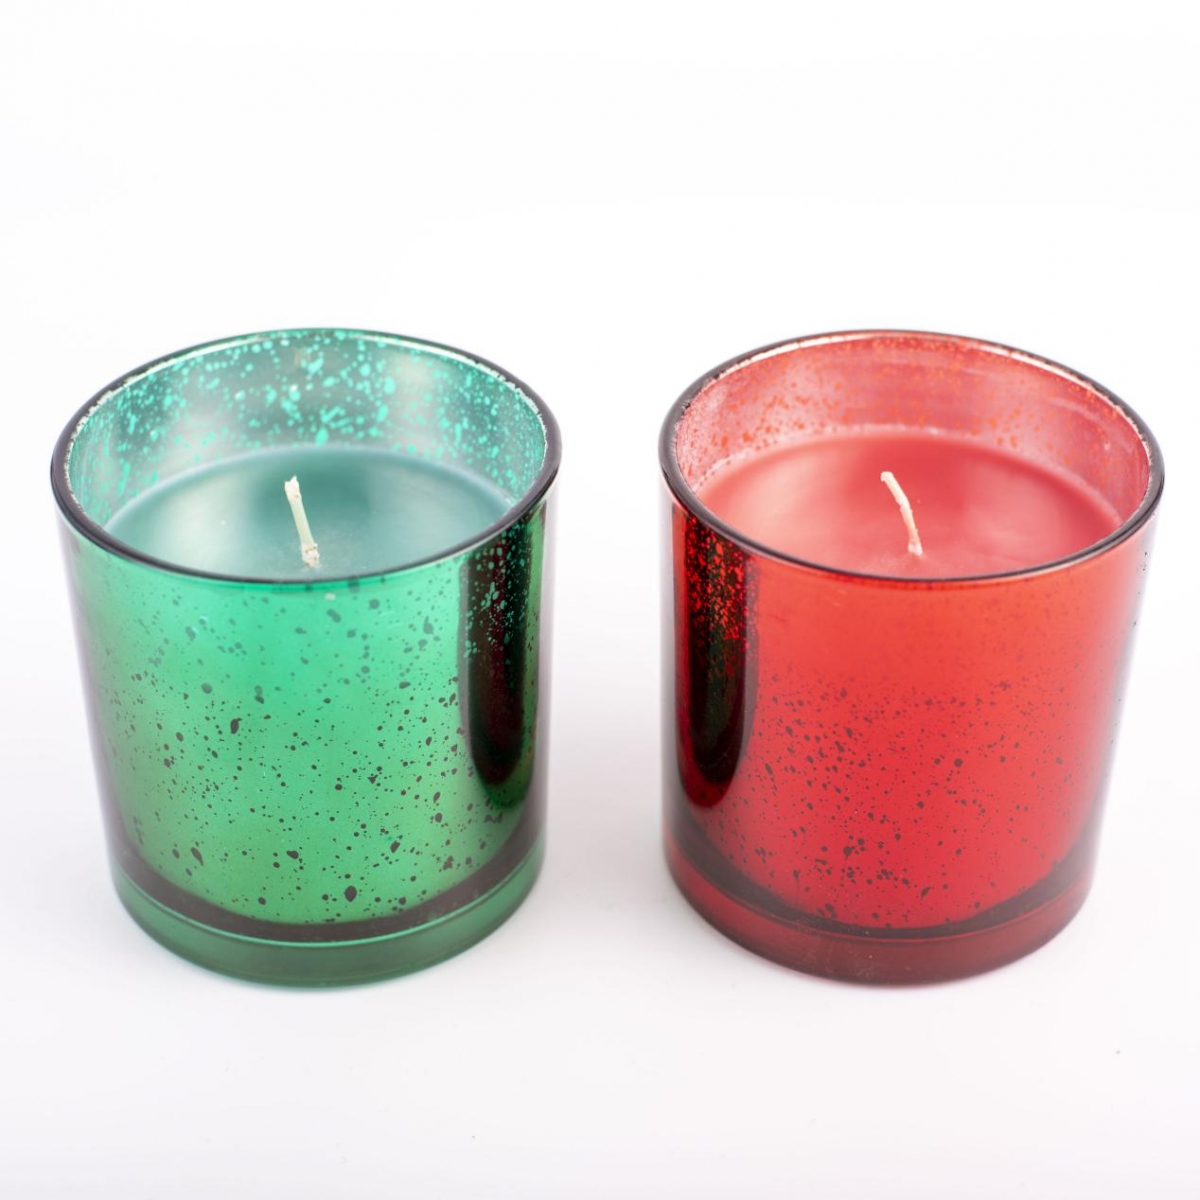 Christmas Scented Candles -Red Dot ,Silver Candle Jar ,Vegan Candles ,China Factory ,Wholesale Price-HOWCANDLE-Candles,Scented Candles,Aromatherapy Candles,Soy Candles,Vegan Candles,Jar Candles,Pillar Candles,Candle Gift Sets,Essential Oils,Reed Diffuser,Candle Holder,